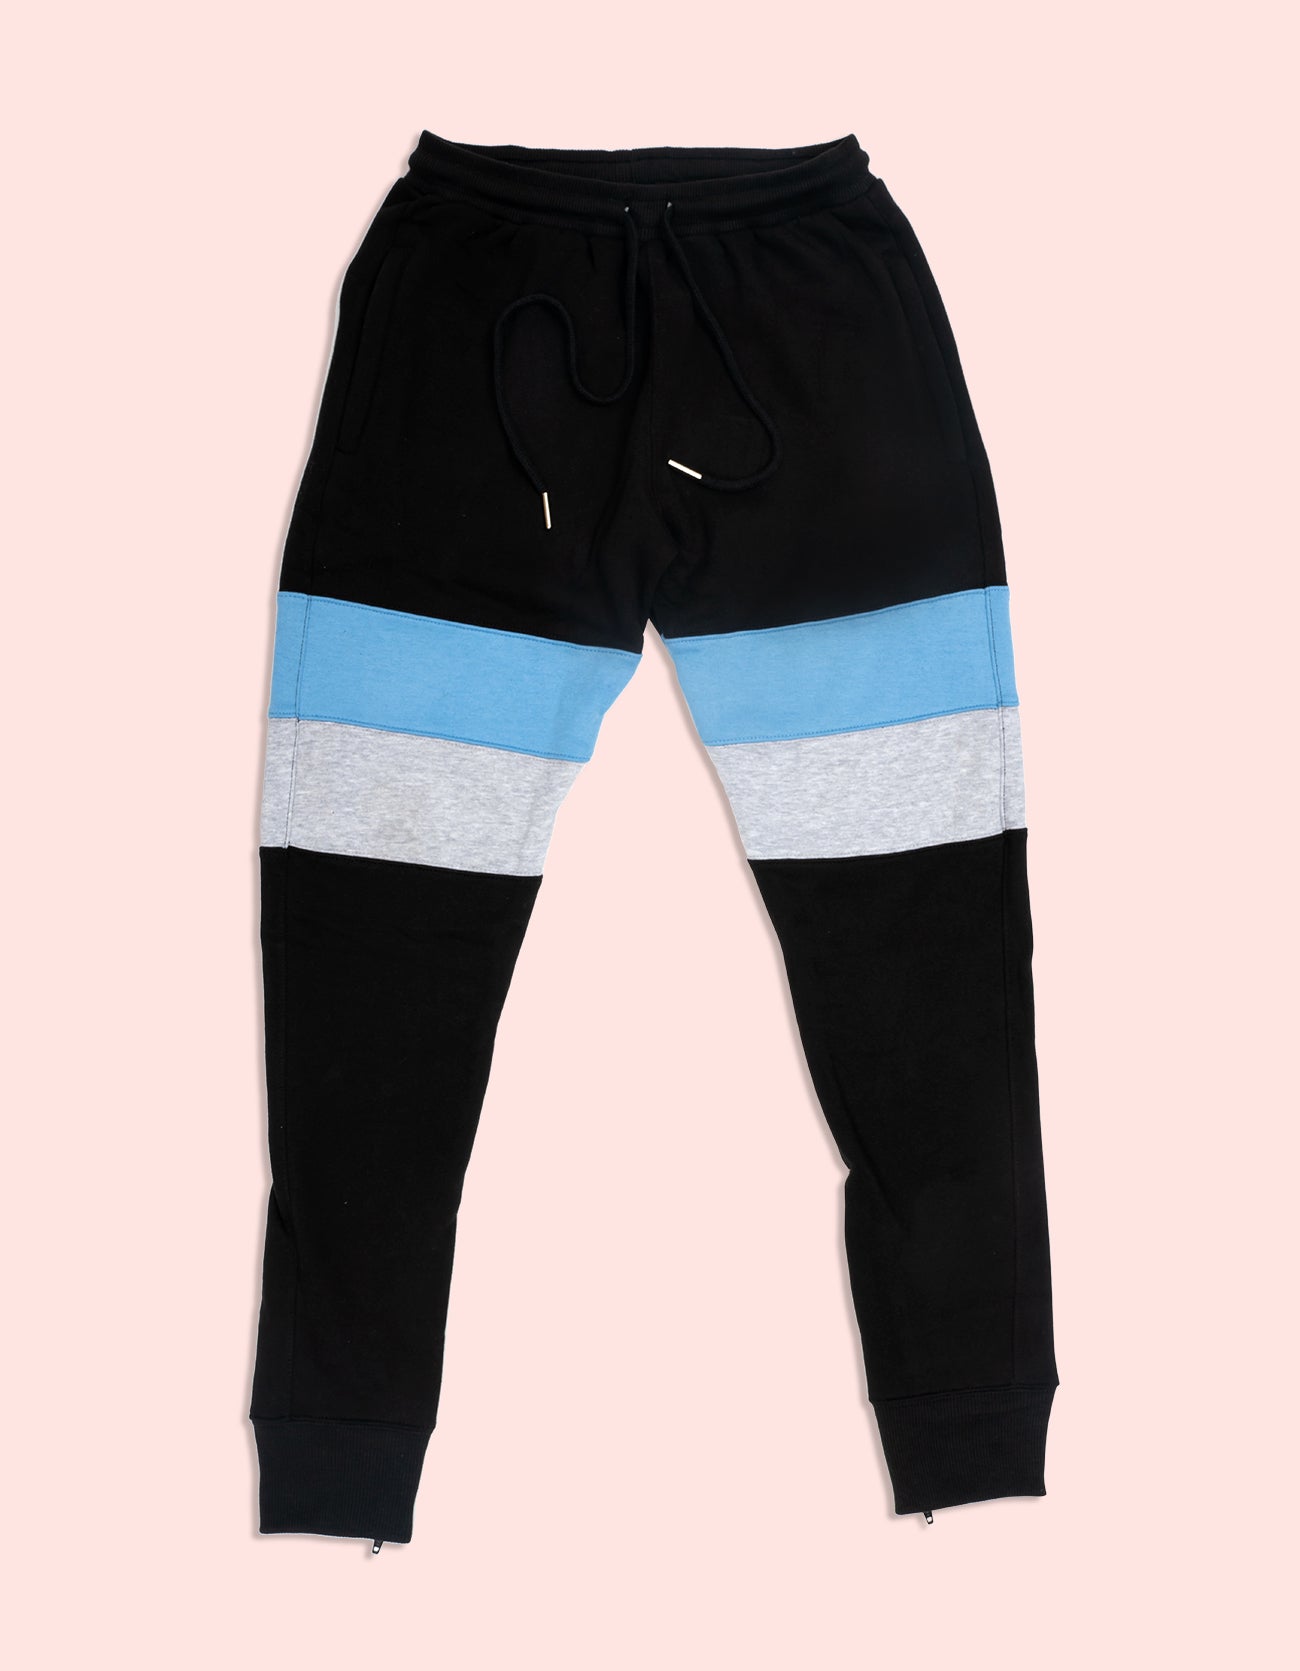 Dipset Couture Black/Baby Blue/Grey  Sweatsuit